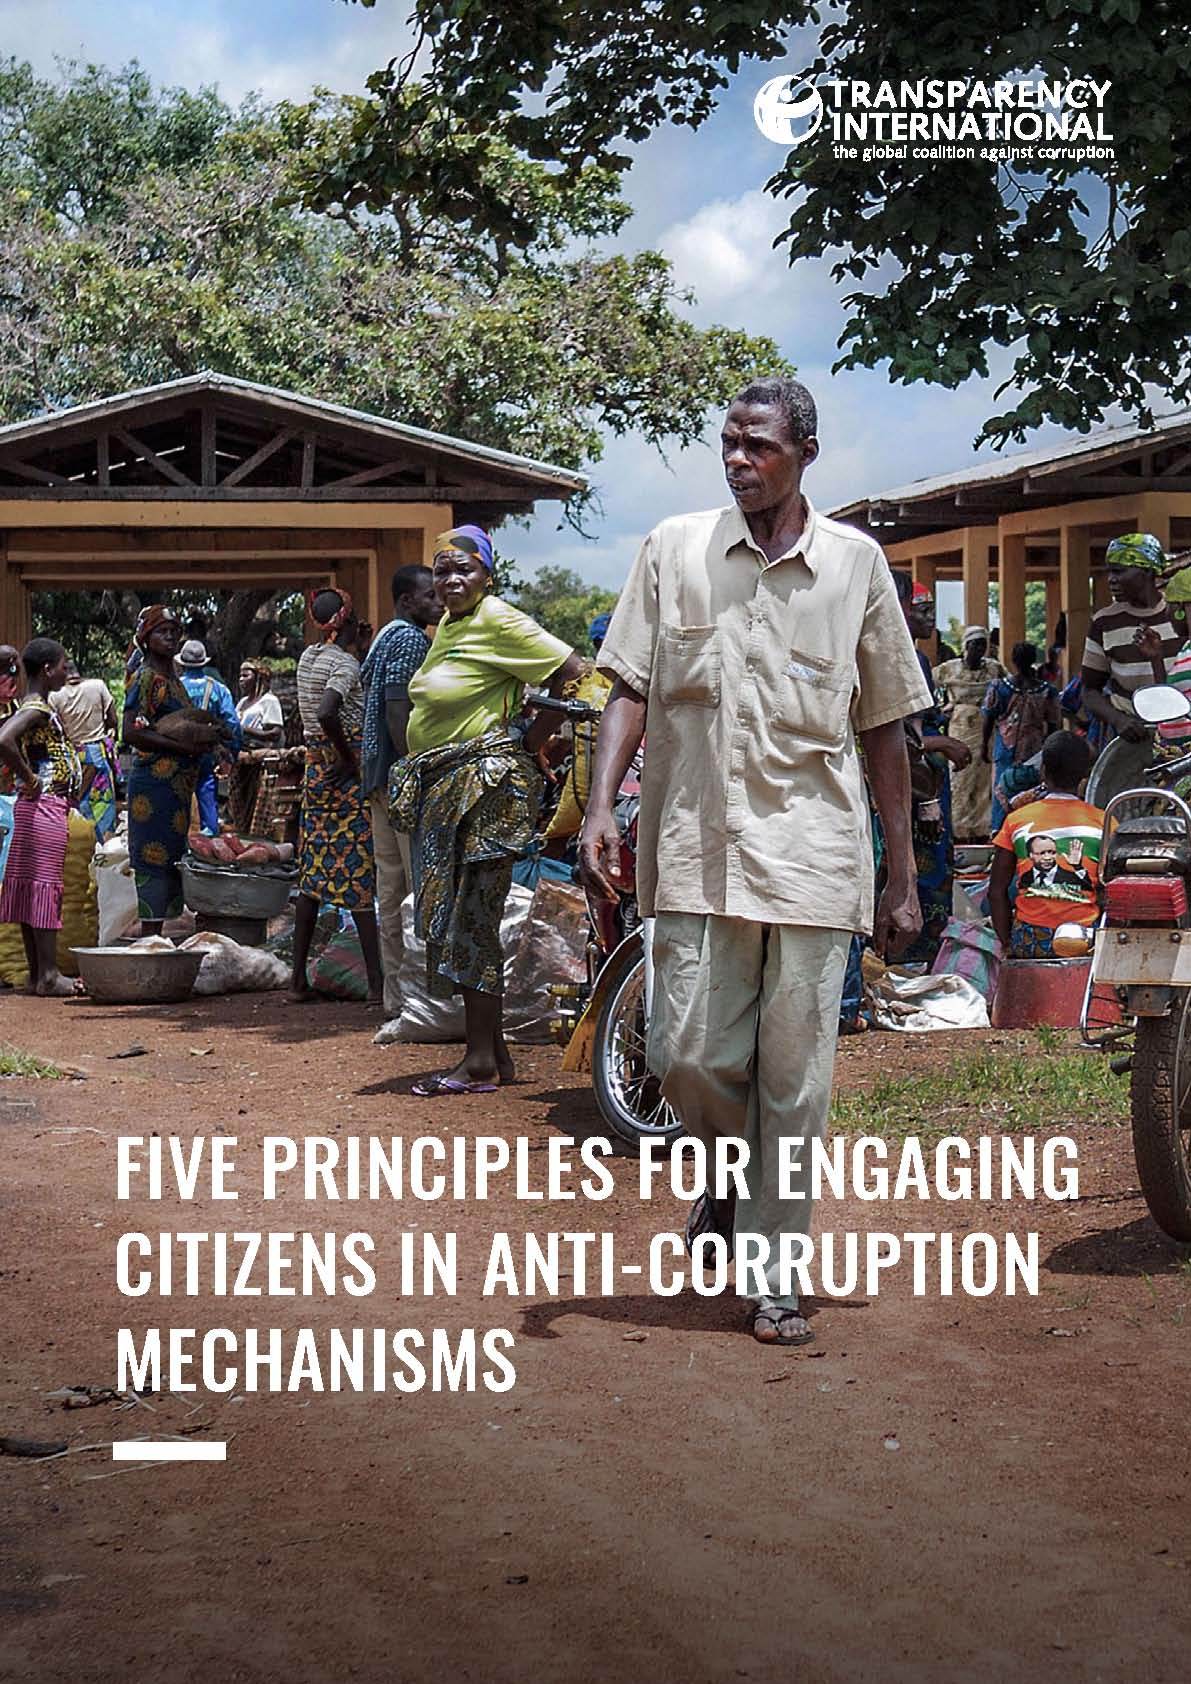 Five principles for engaging citizens in Anti-Corruption mechanisms